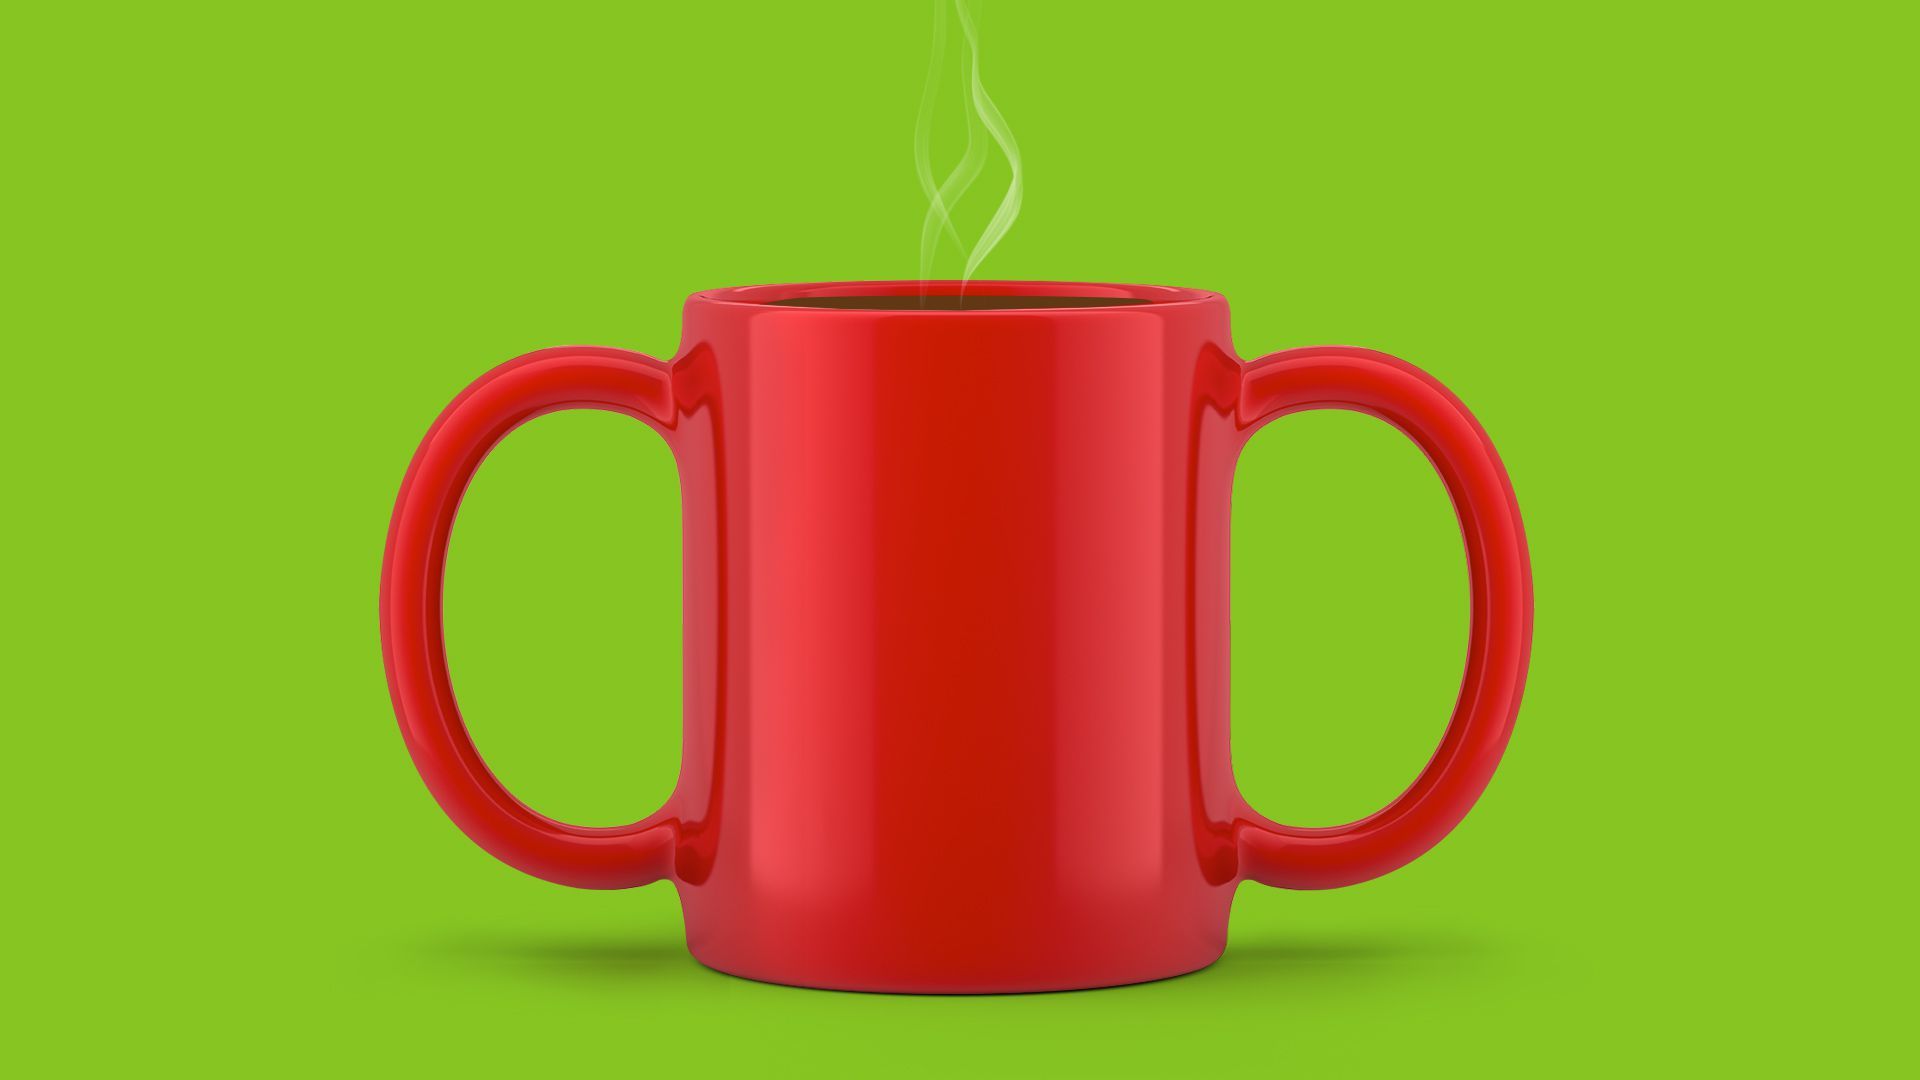 Illustration of a coffee mug with two handles.  